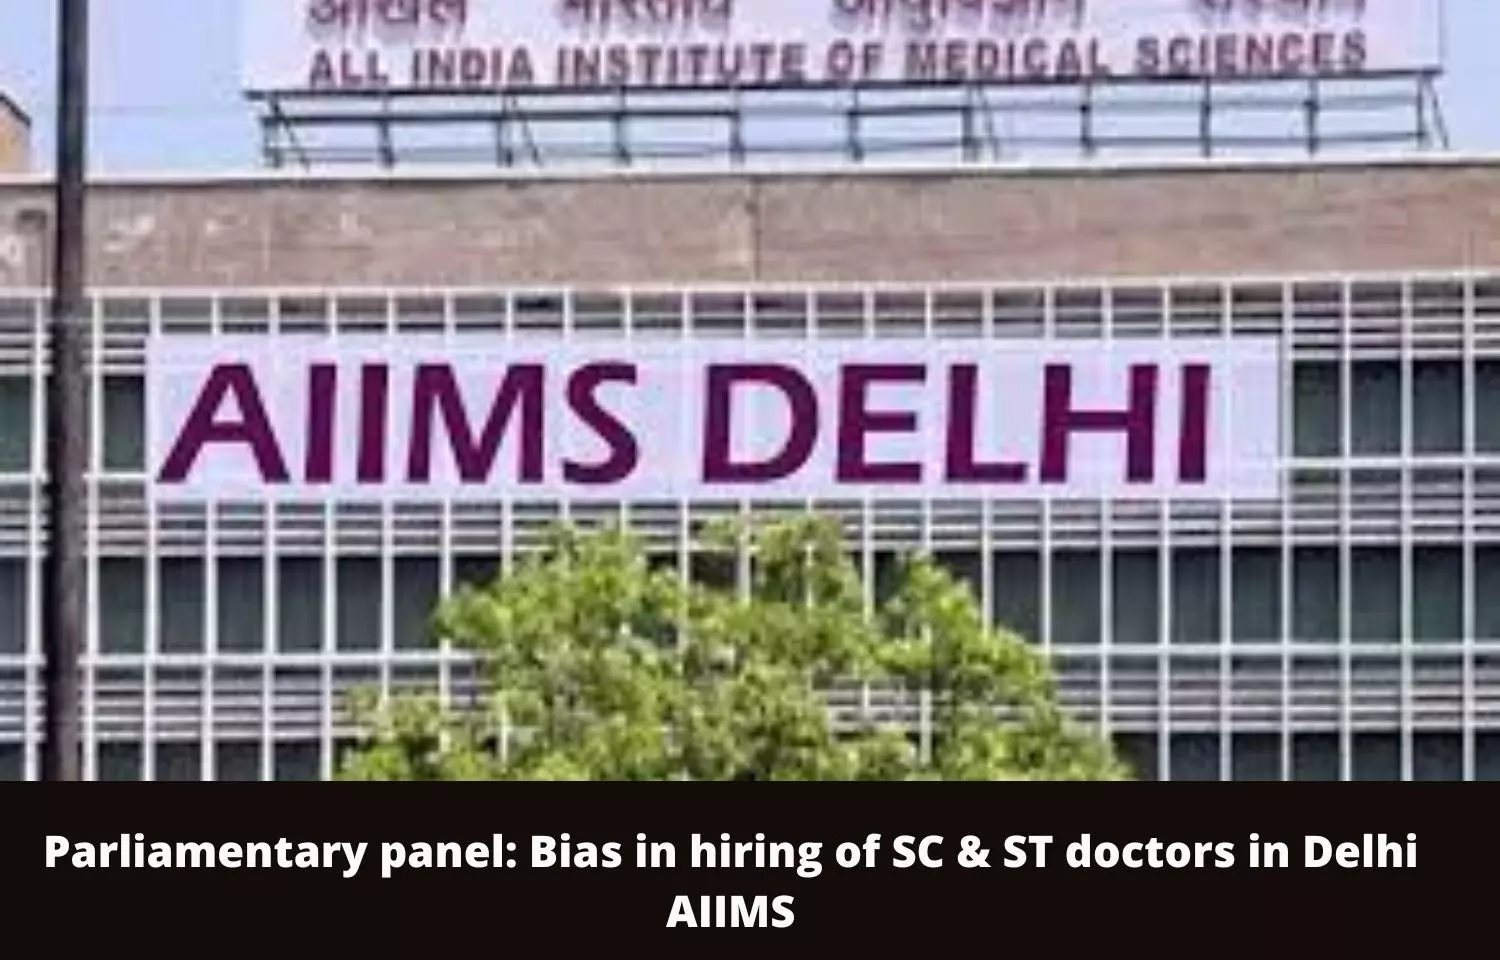 Parliamentary panel bias in hiring of SC and ST doctors in Delhi AIIMS